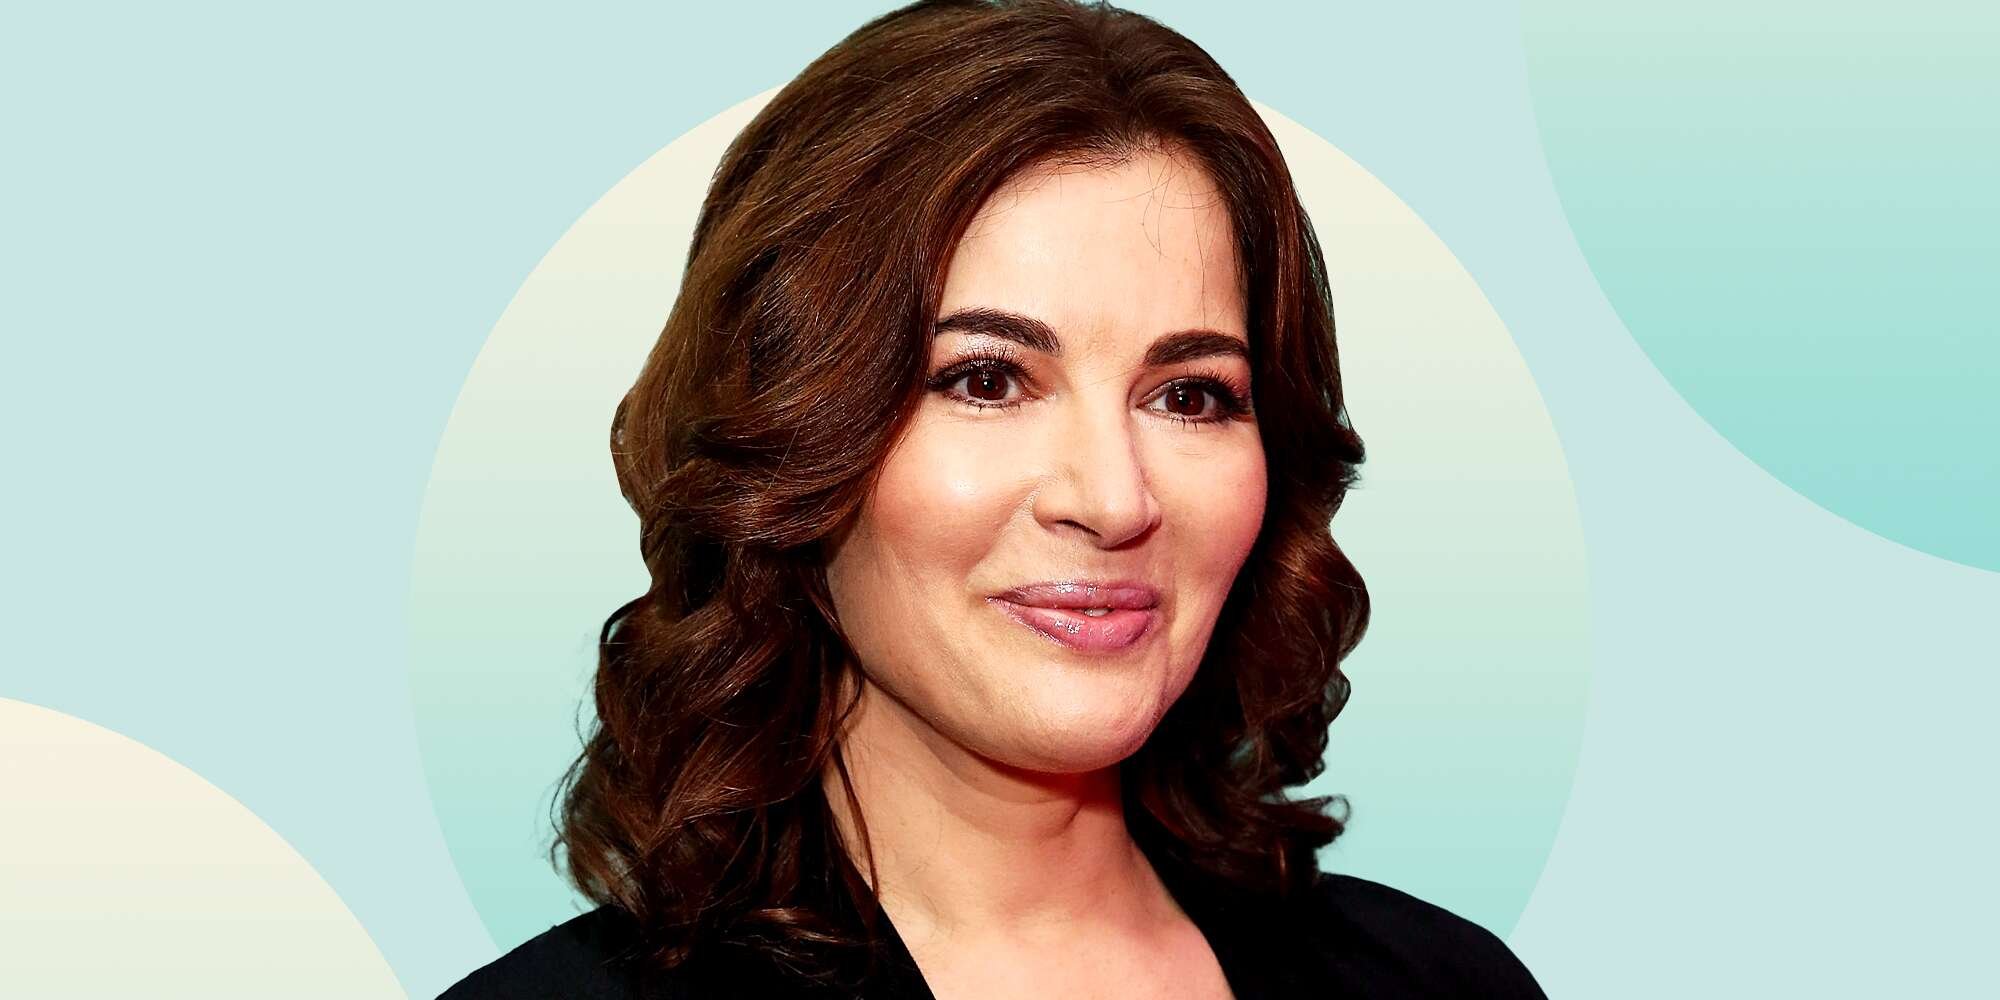 Nigella Lawson's 6-Ingredient Cauliflower Soup Is Packed with Anti-Inflammatory Ingredients—and Fans Say It's "Divine"